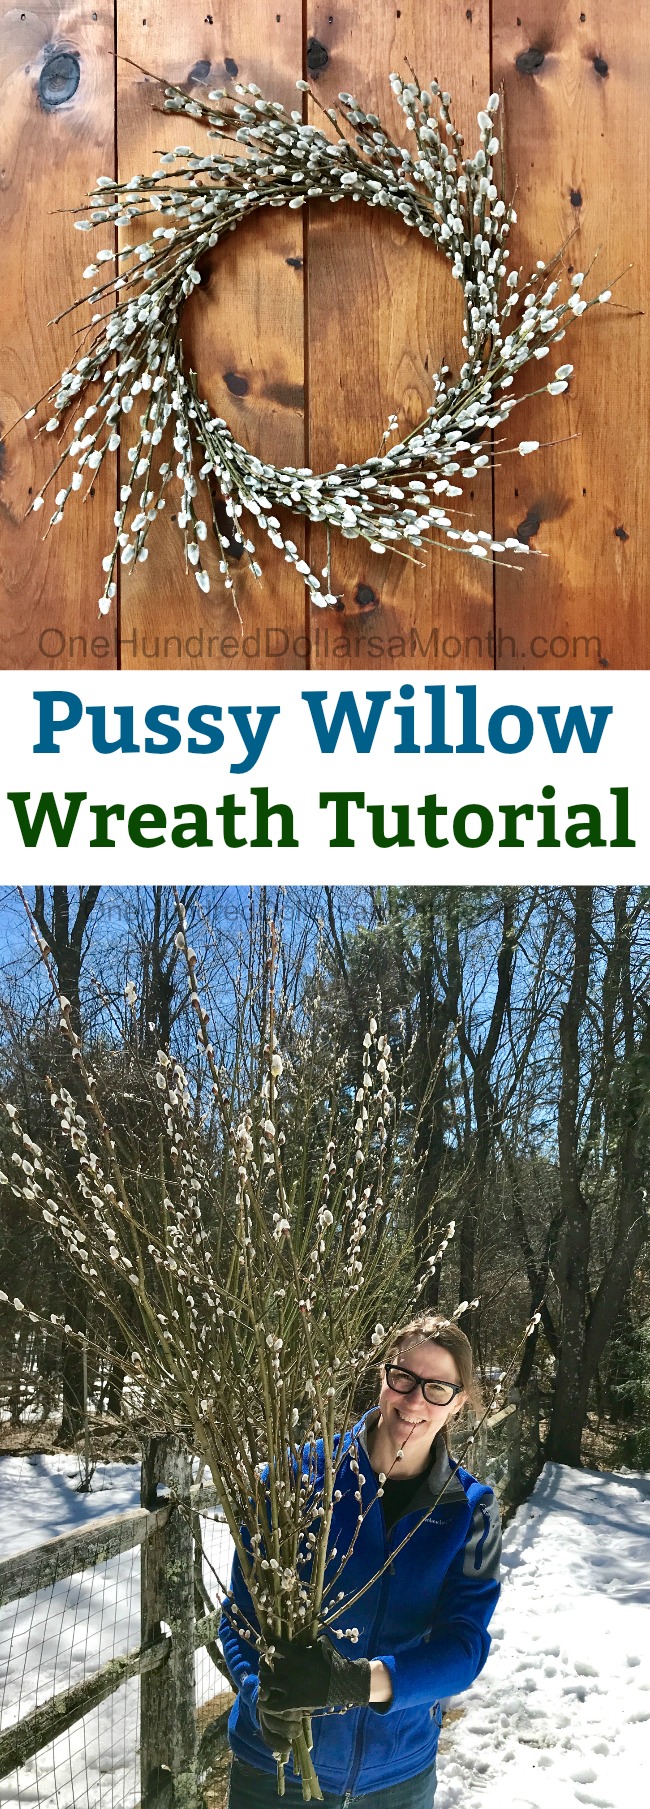 How to Make a Pussy Willow Wreath – Easy Picture Tutorial